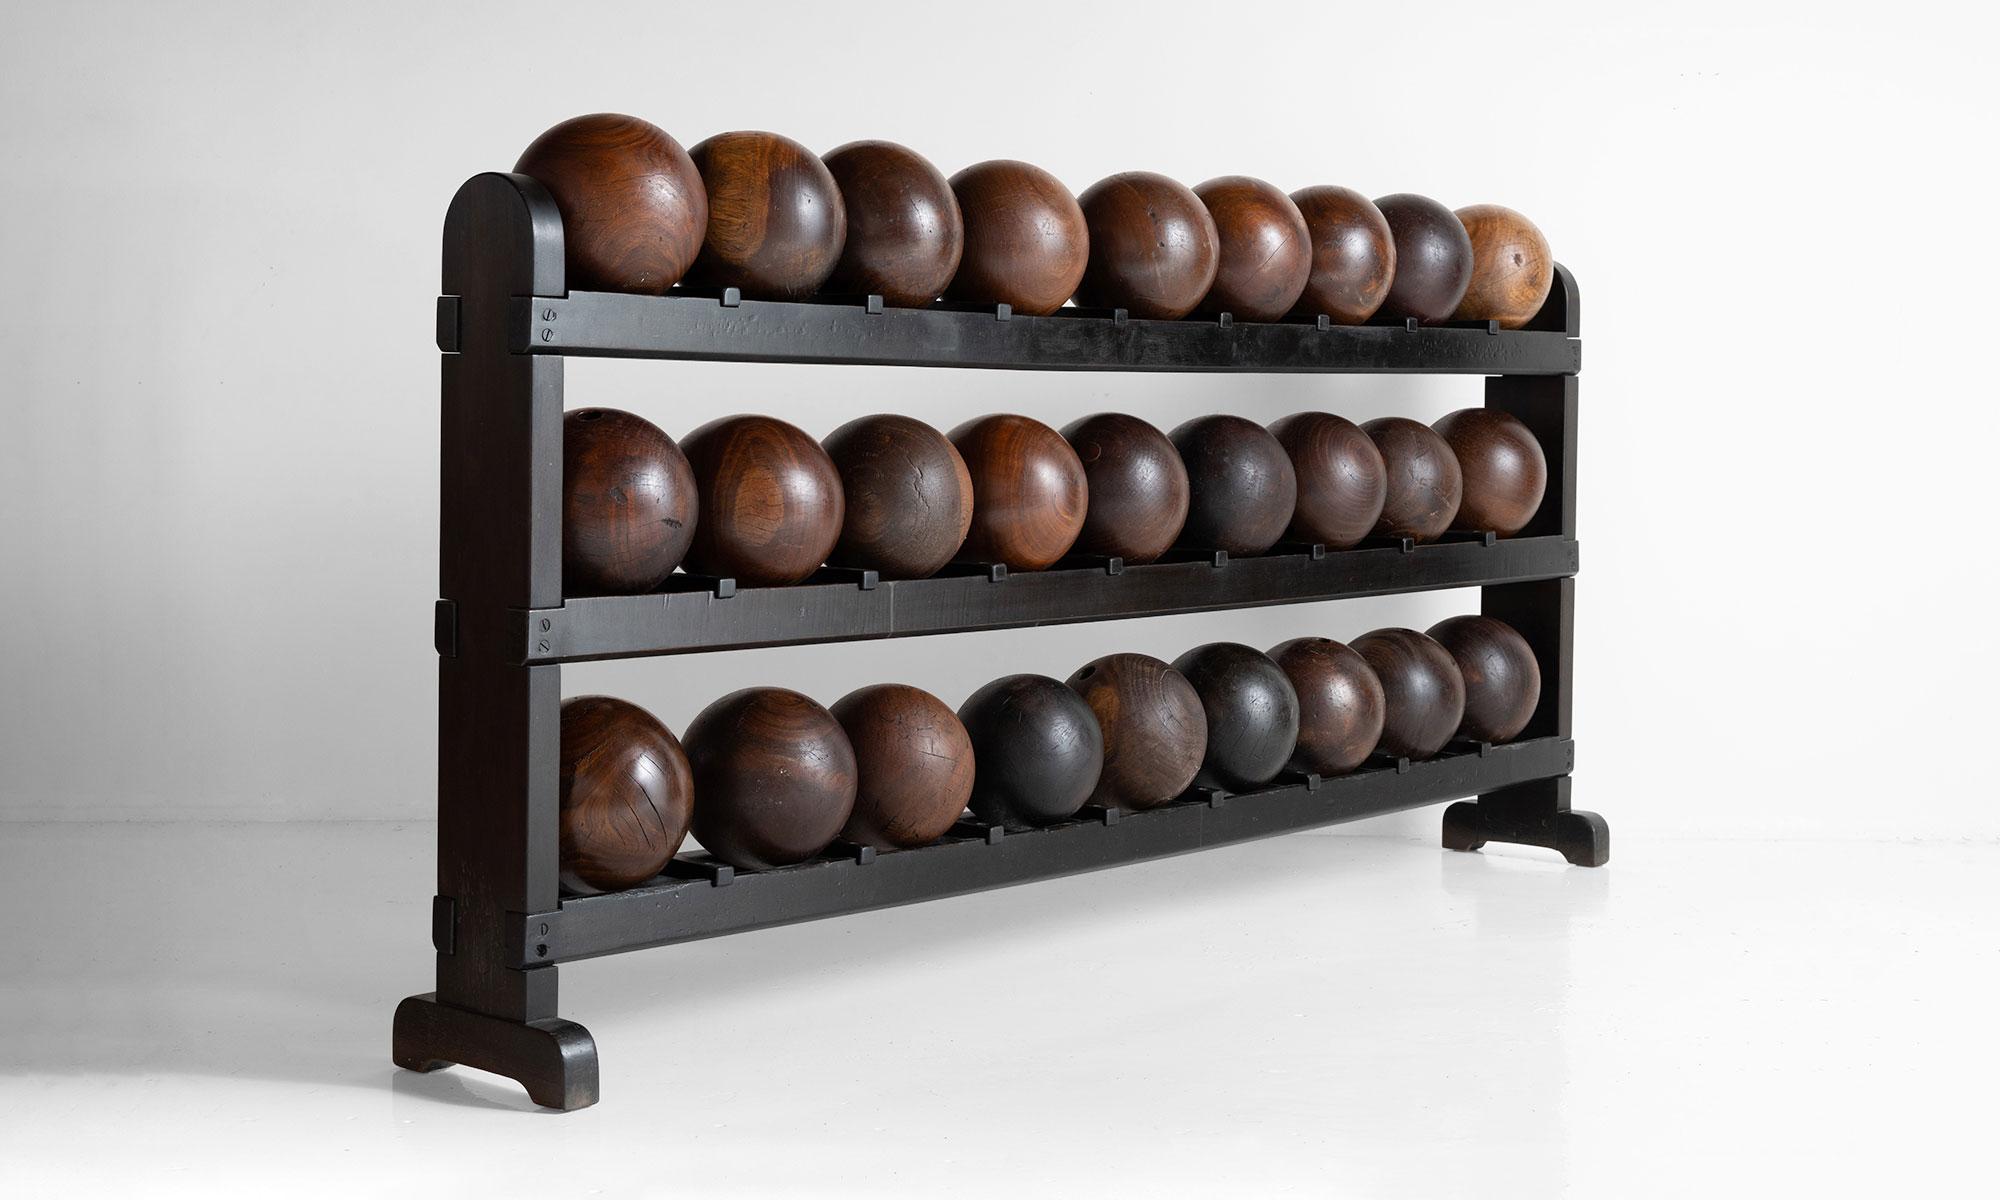 Painted three tiered rack with (27) balls.


Rack:
84.5” W x 11” D x 37.75” H 

Bowling Balls: 
approx. 8” diameter.